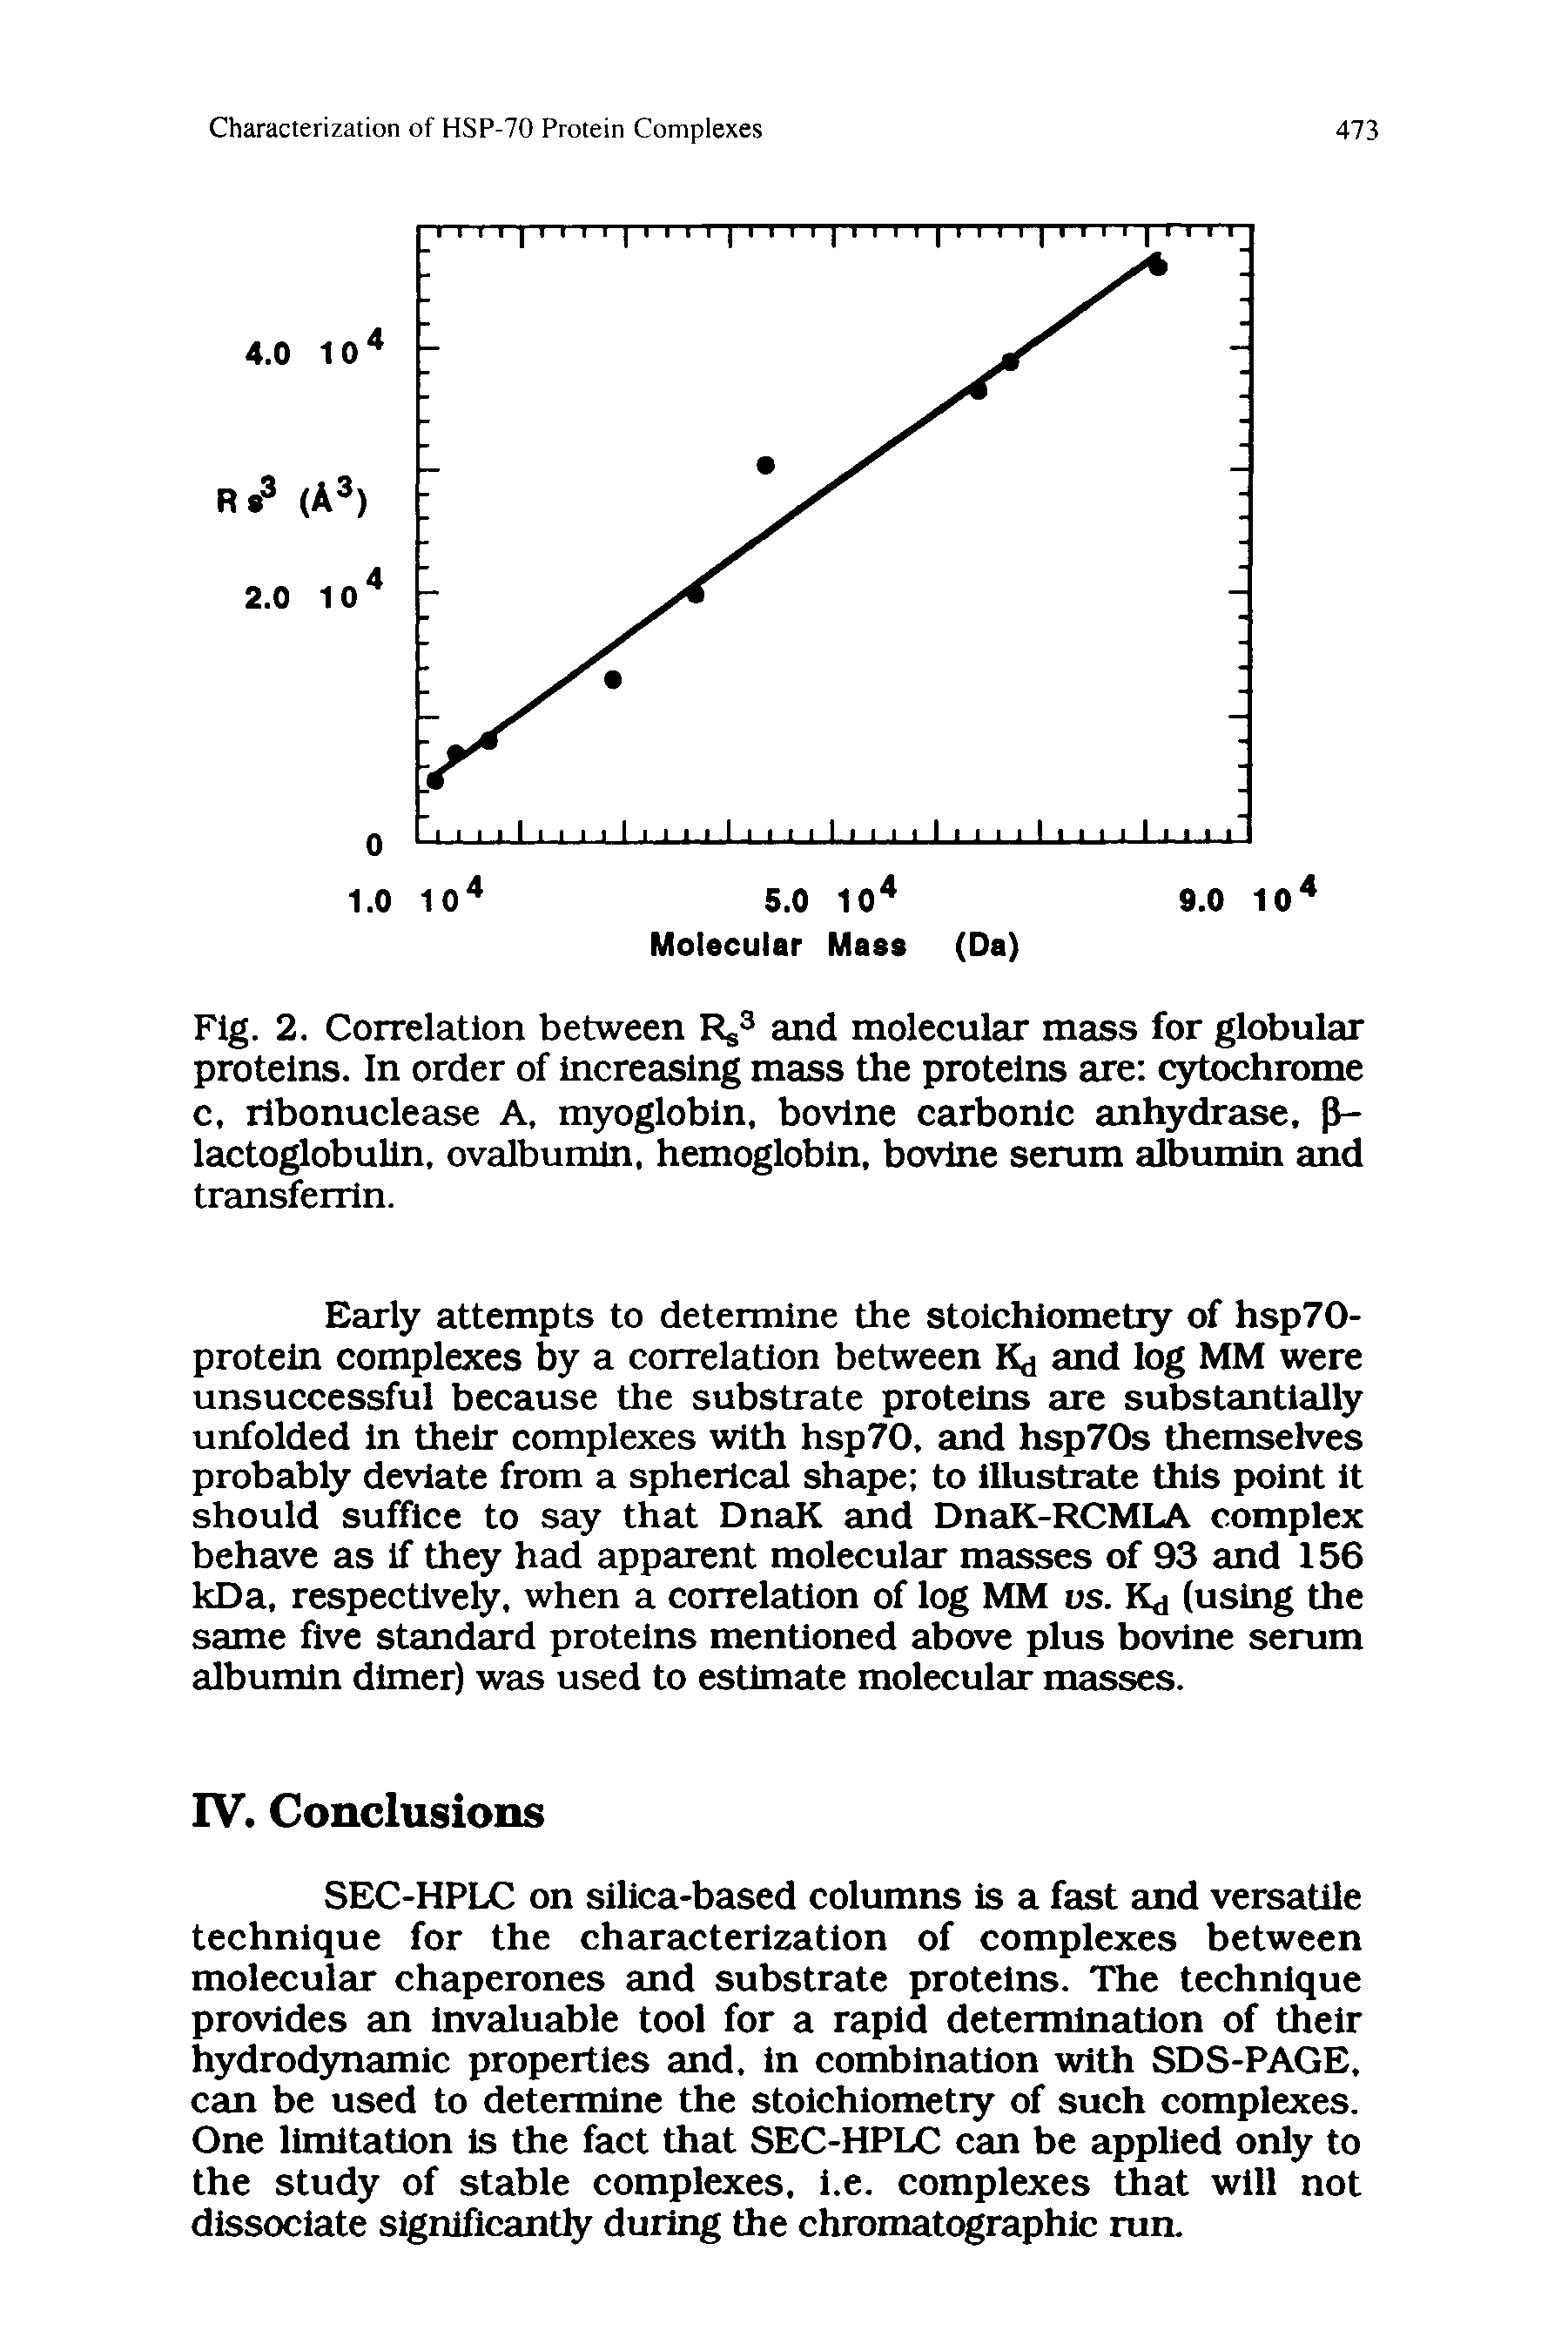 Fig. 2. Correlation between and molecular mass for globular proteins. In order of increasing mass the proteins are cjrtochrome c. ribonuclease A, myoglobin, bovine carbonic anhydrase, p-lactoglobulin, ovalbumin, hemoglobin, bovine serum albumin and transferrin.